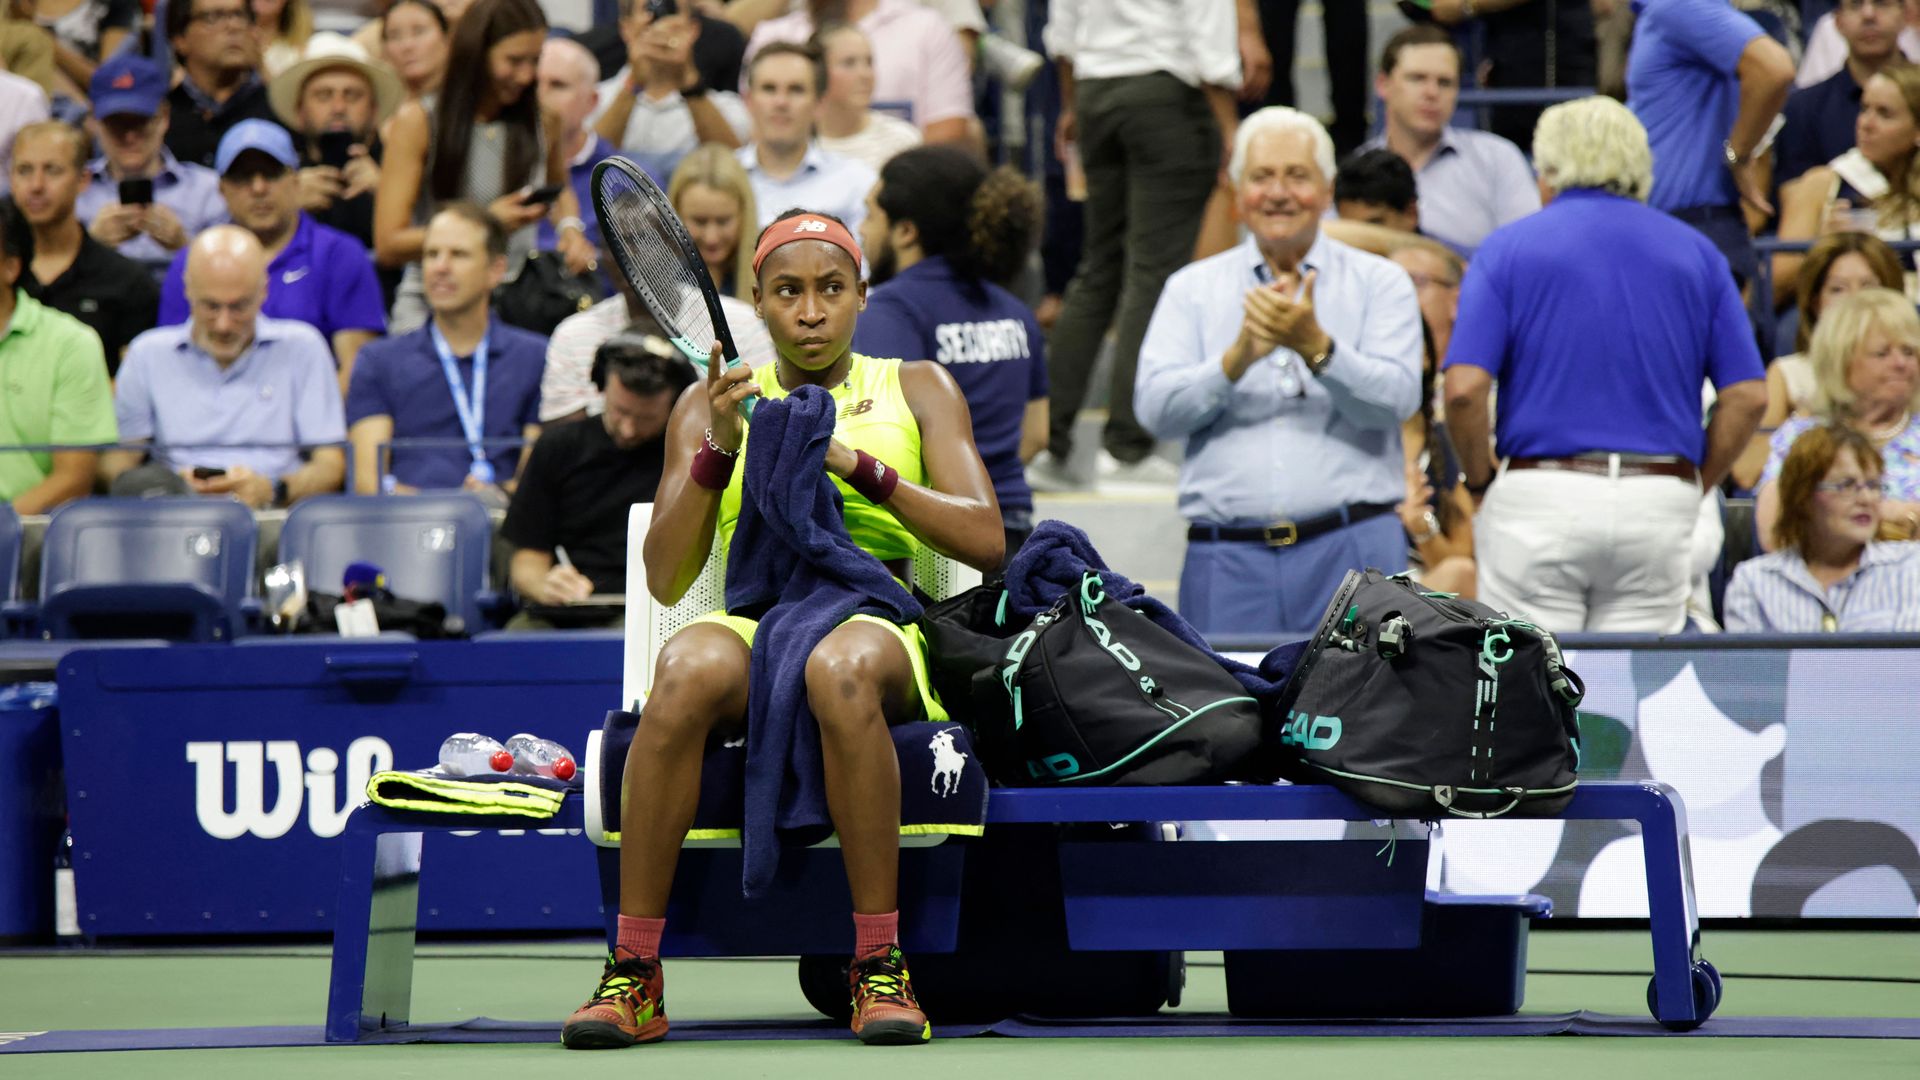  USA's Coco Gauff sits as the match is delayed by a protestor in the crowd during the US Open tennis tournament women's singles semi-finals match against Czech Republic's Karolina Muchova at the USTA Billie Jean King National Tennis Center in New York City, on September 7, 2023.